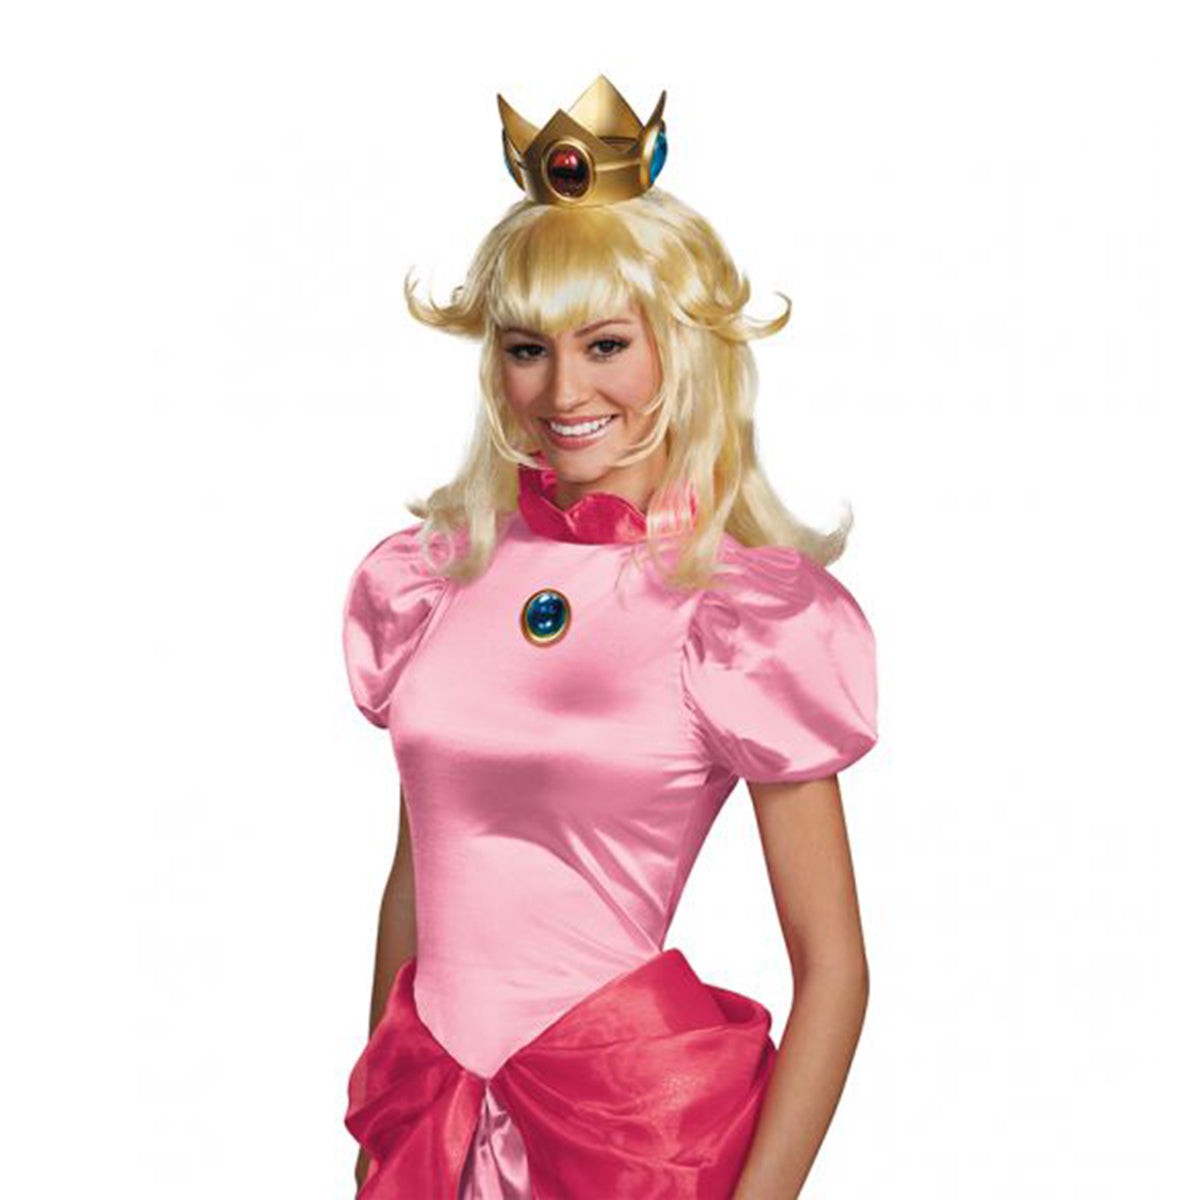 DISGUISE (TOY-SPORT) Costume Accessories Super Mario Bros. Princess Peach Wig for Adults 039897738055